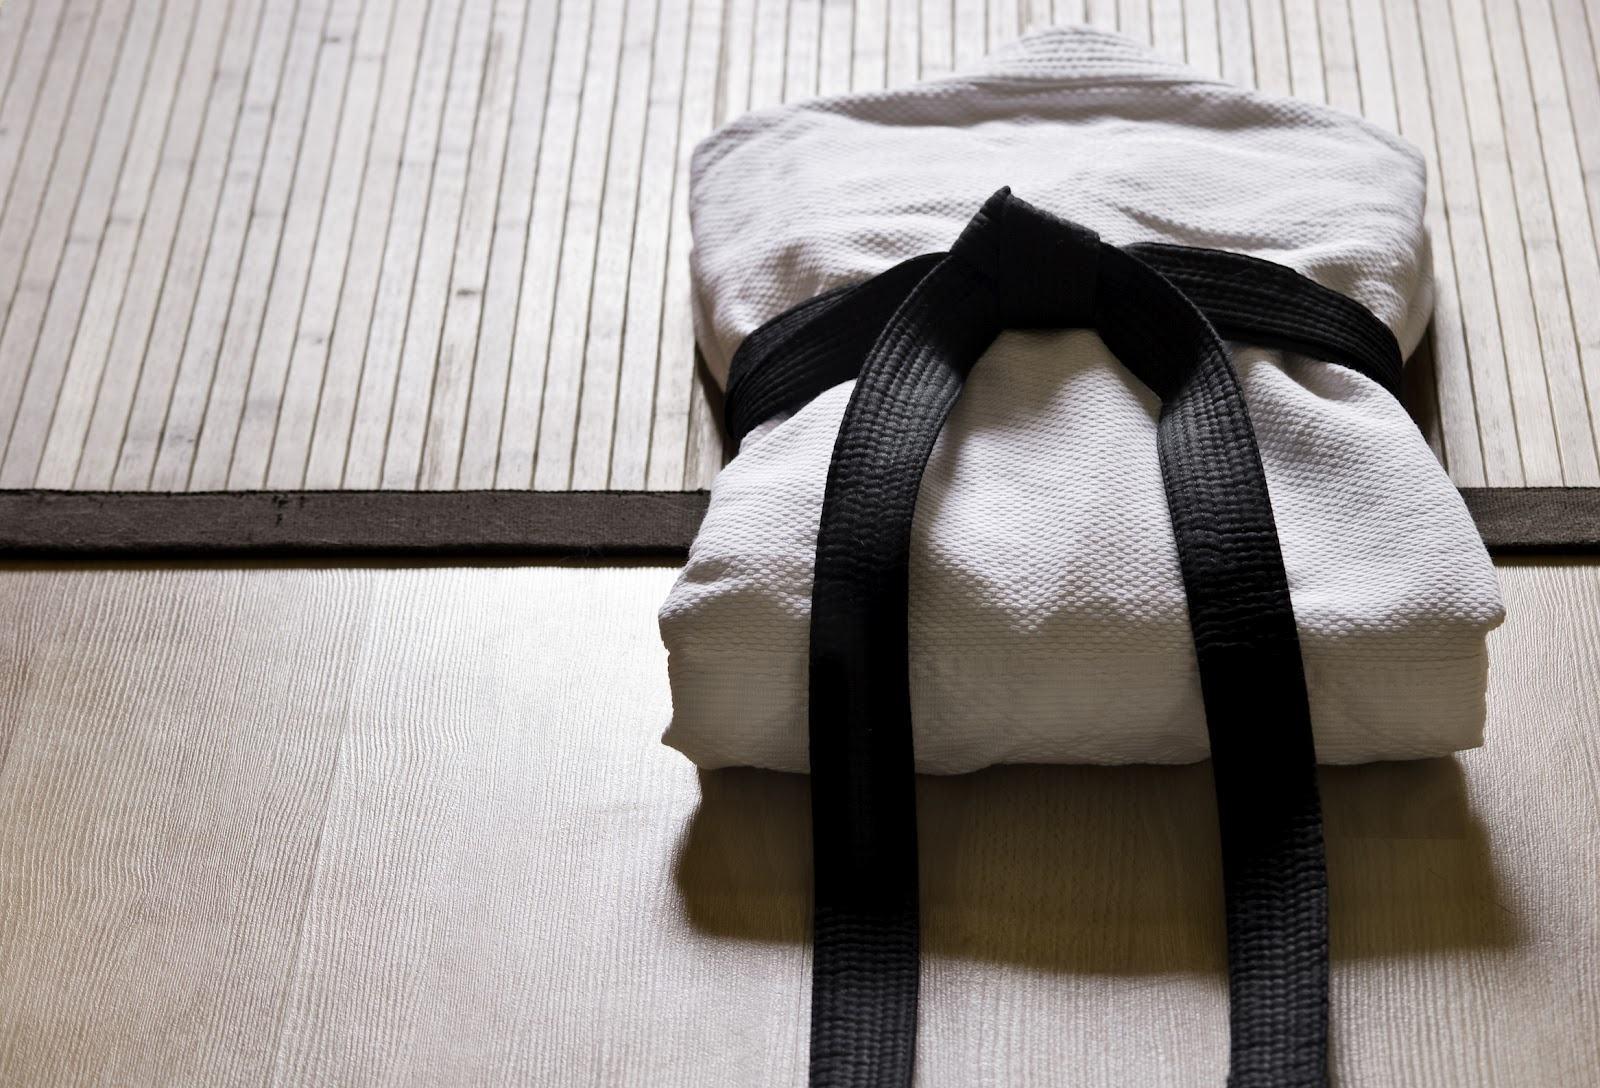 Karate Live Wallpaper for Android